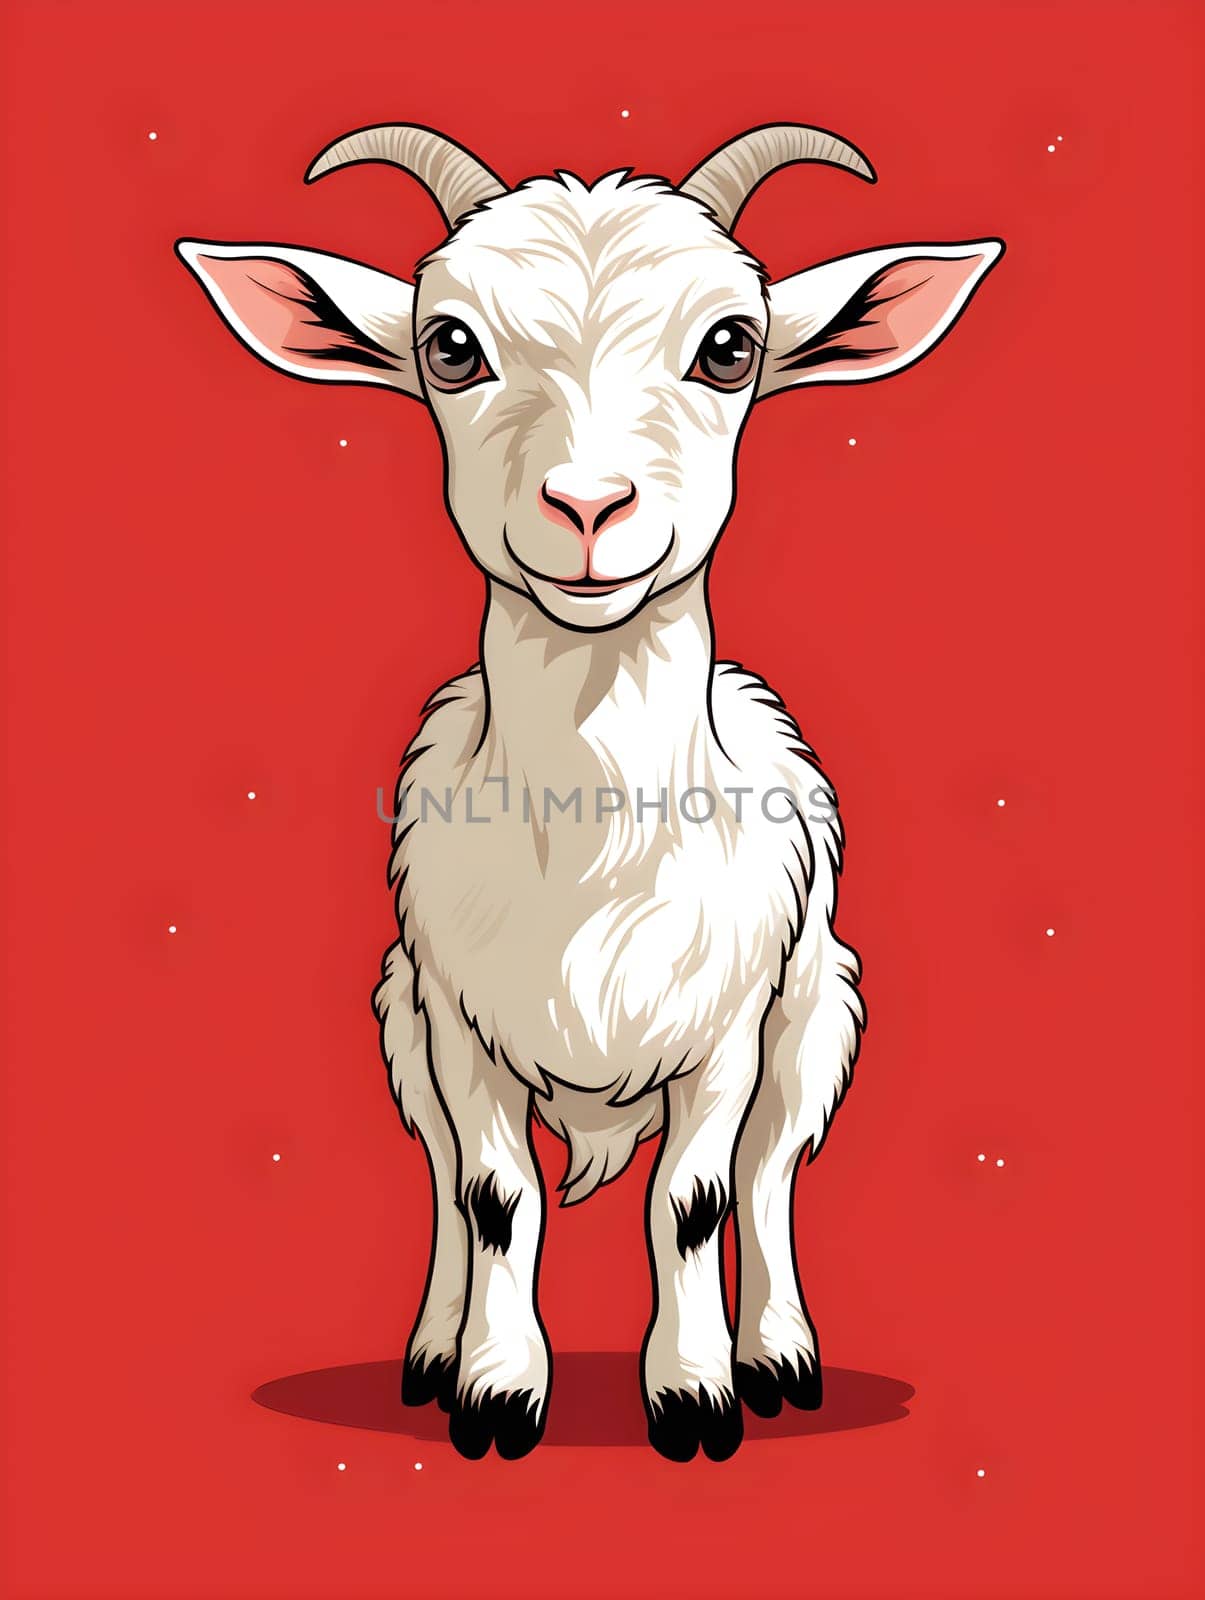 A cartoon illustration of a cute goat on red background by chrisroll